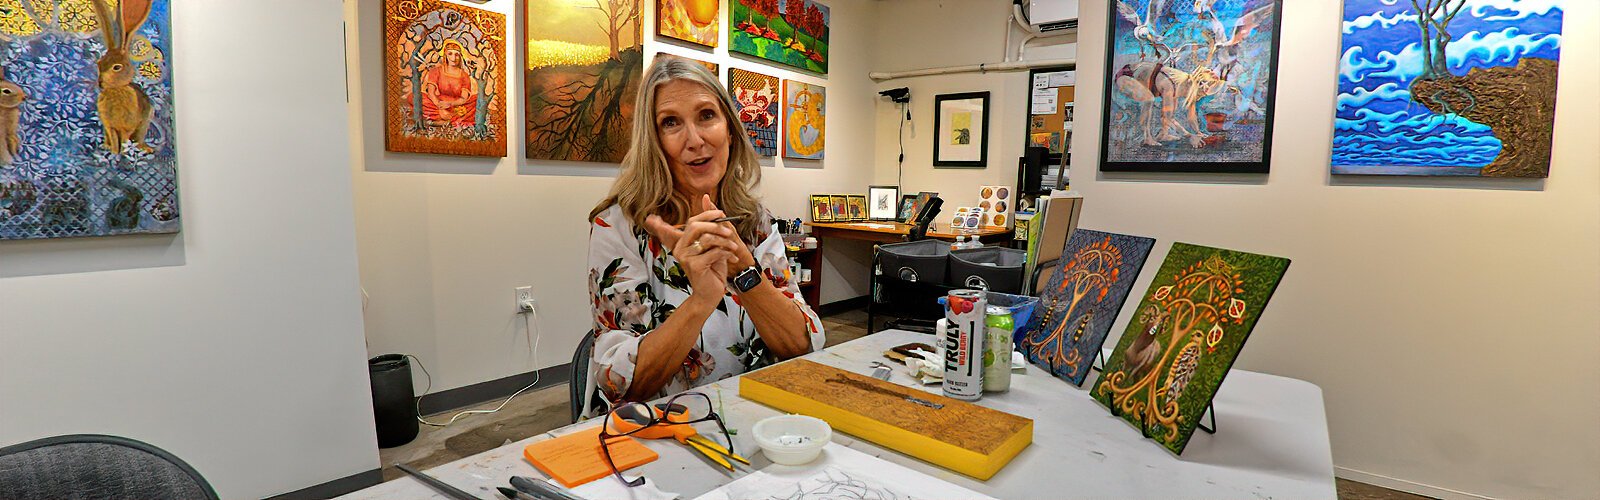  Visual artist Denise Cormier Mahoney works on a new art piece as she welcomes visitors at her studio during the Second Saturday ArtWalk in the Warehouse Arts District.